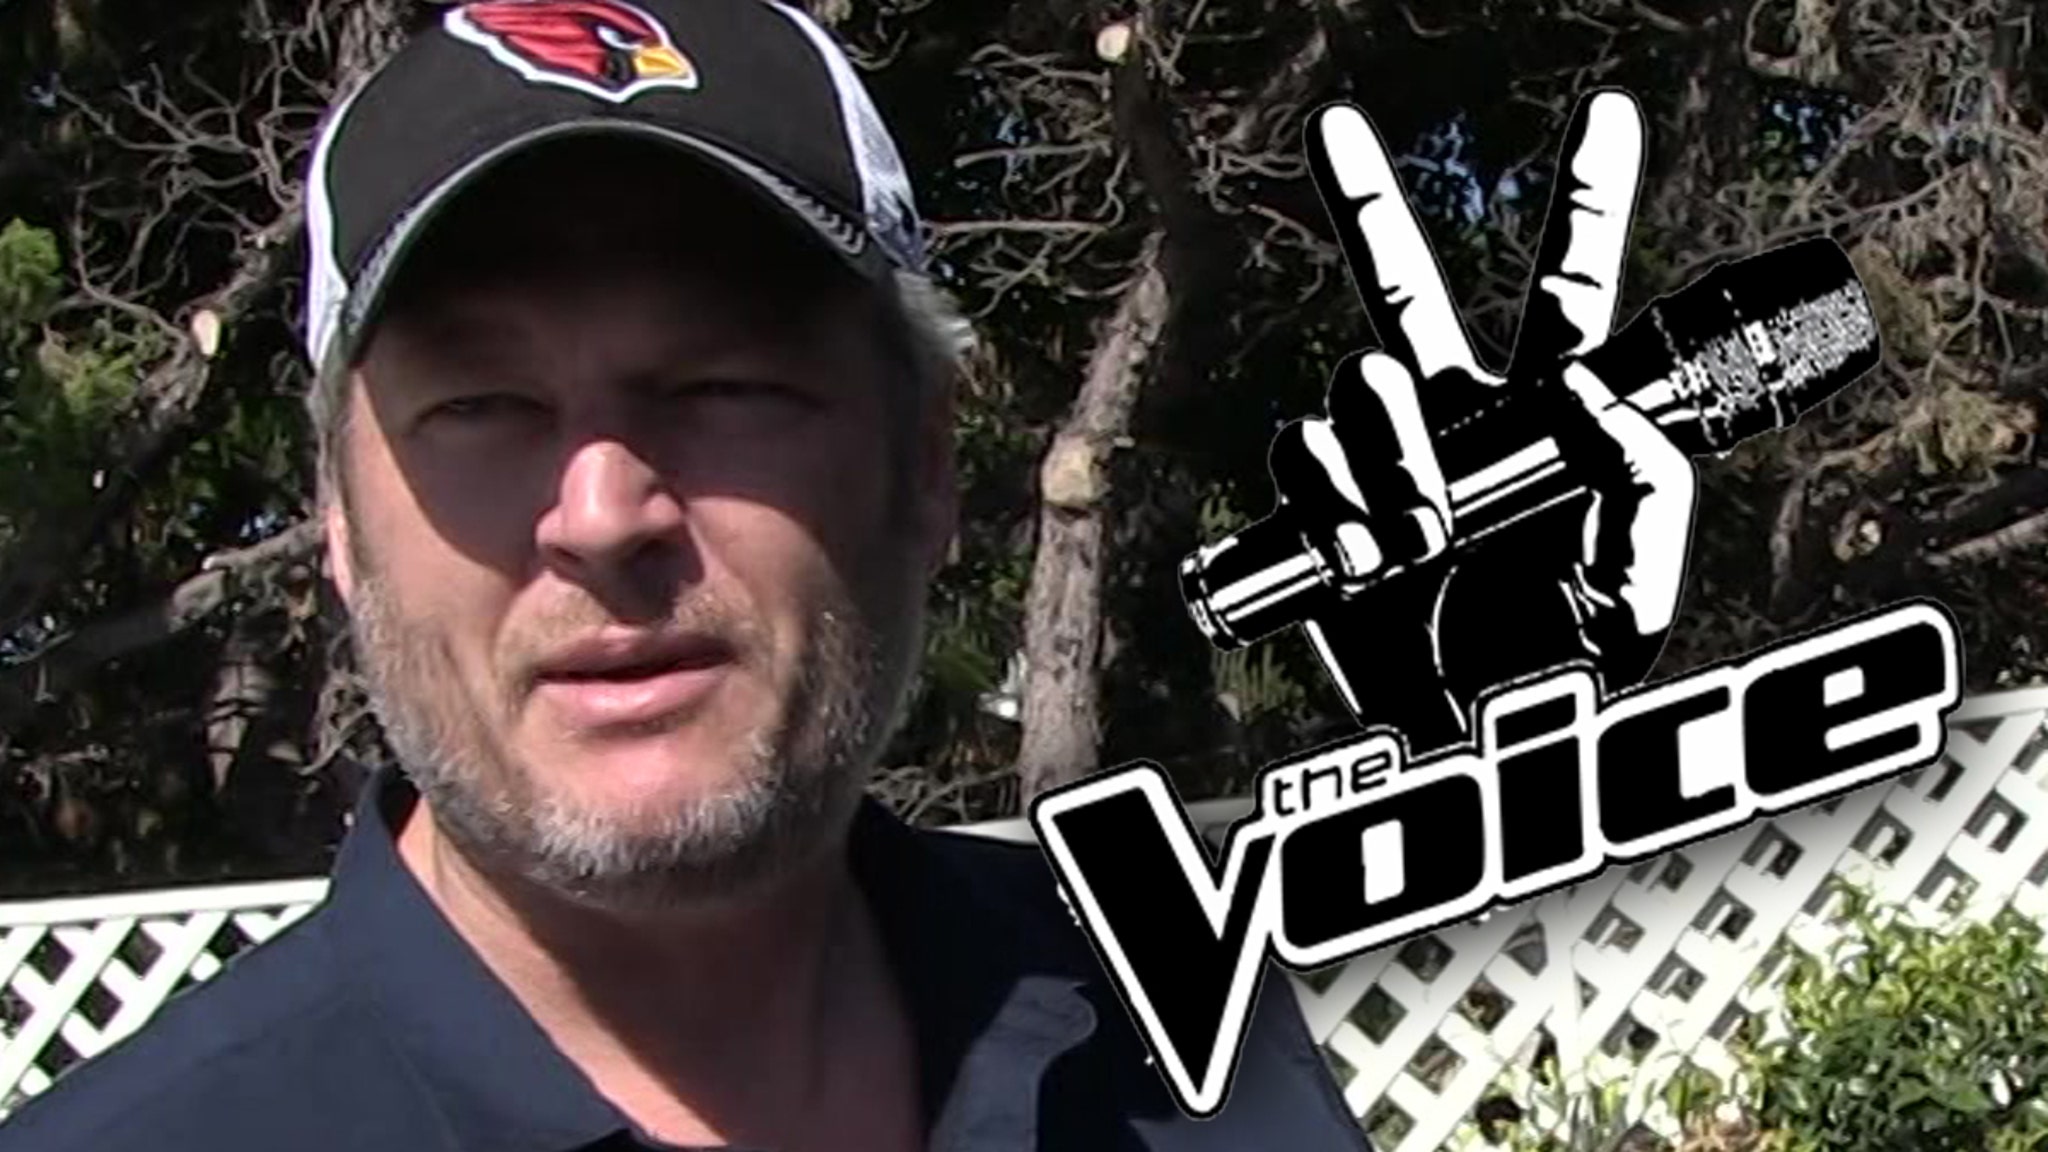 Blake Shelton Leaving ‘The Voice’ After 12 Years